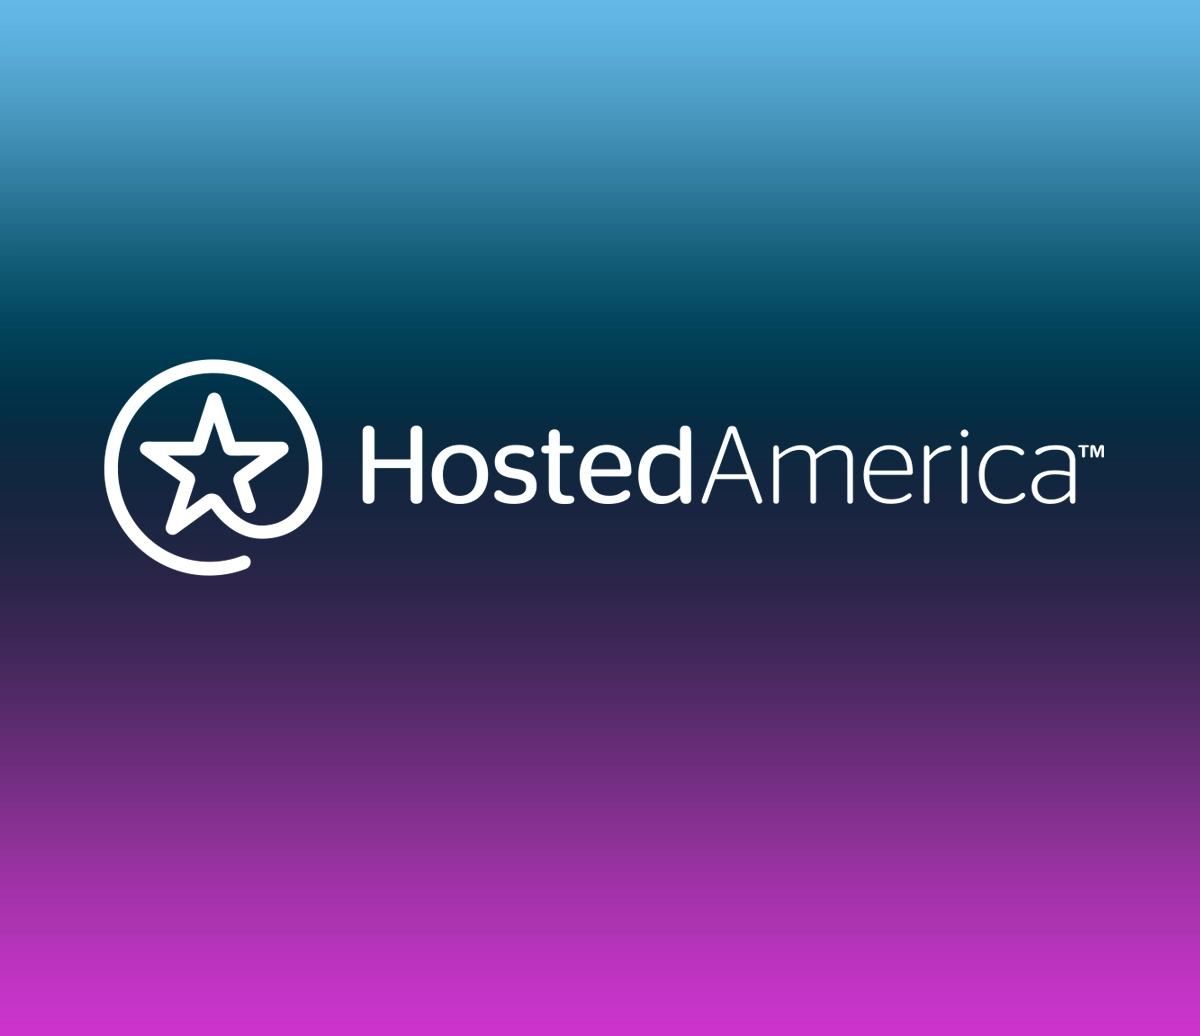 hosted-america-blue